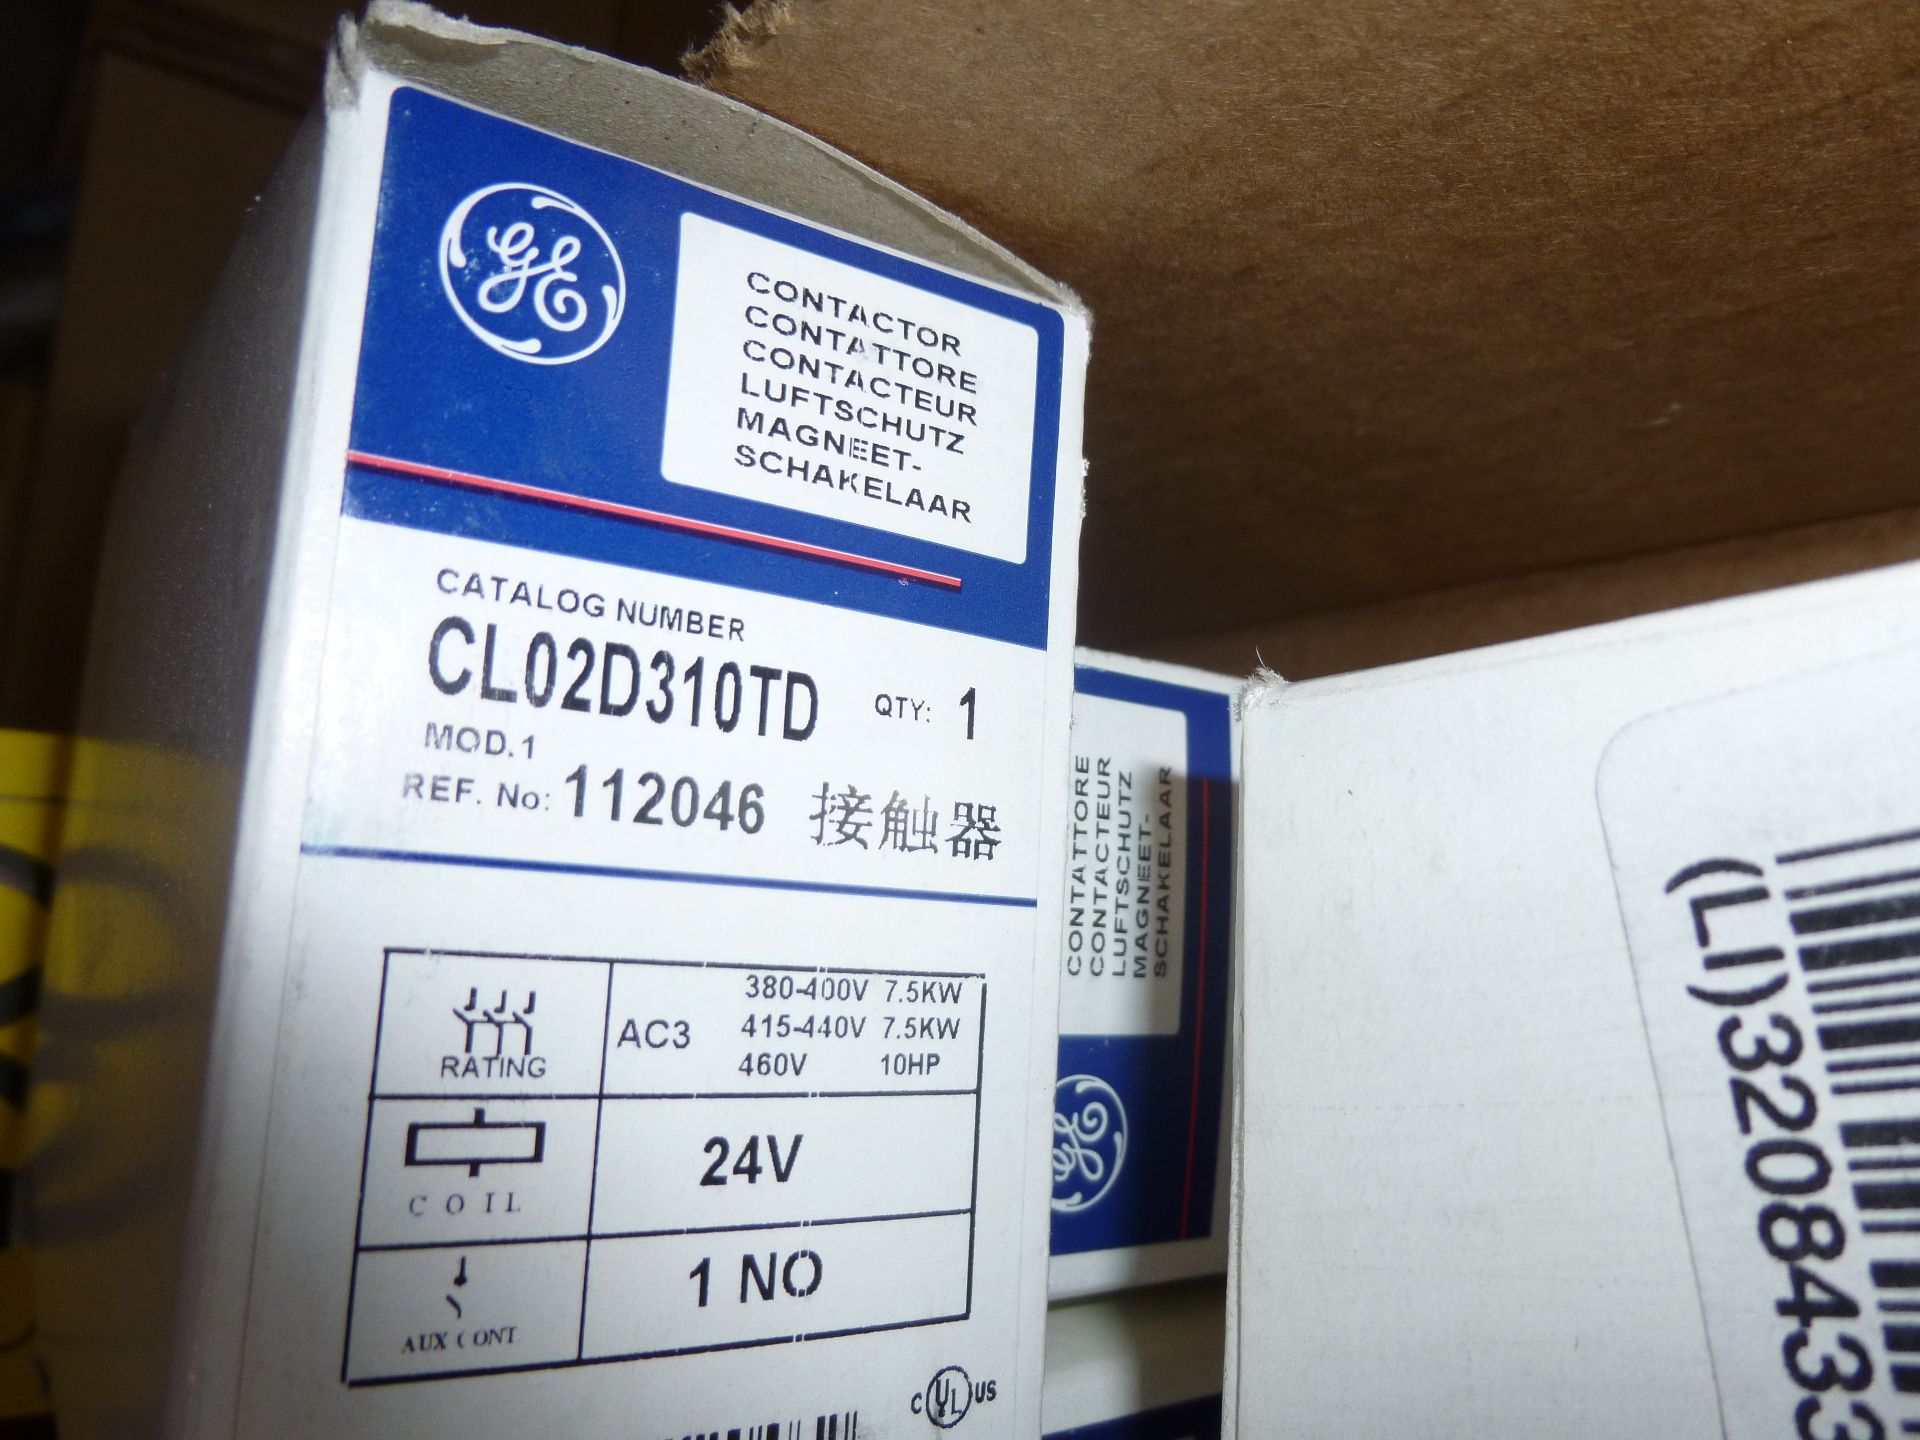 Qty 5 GE contactor CL02D310TD, new in boxes, as always with Brolyn LLC auctions, all lots can be - Image 2 of 2